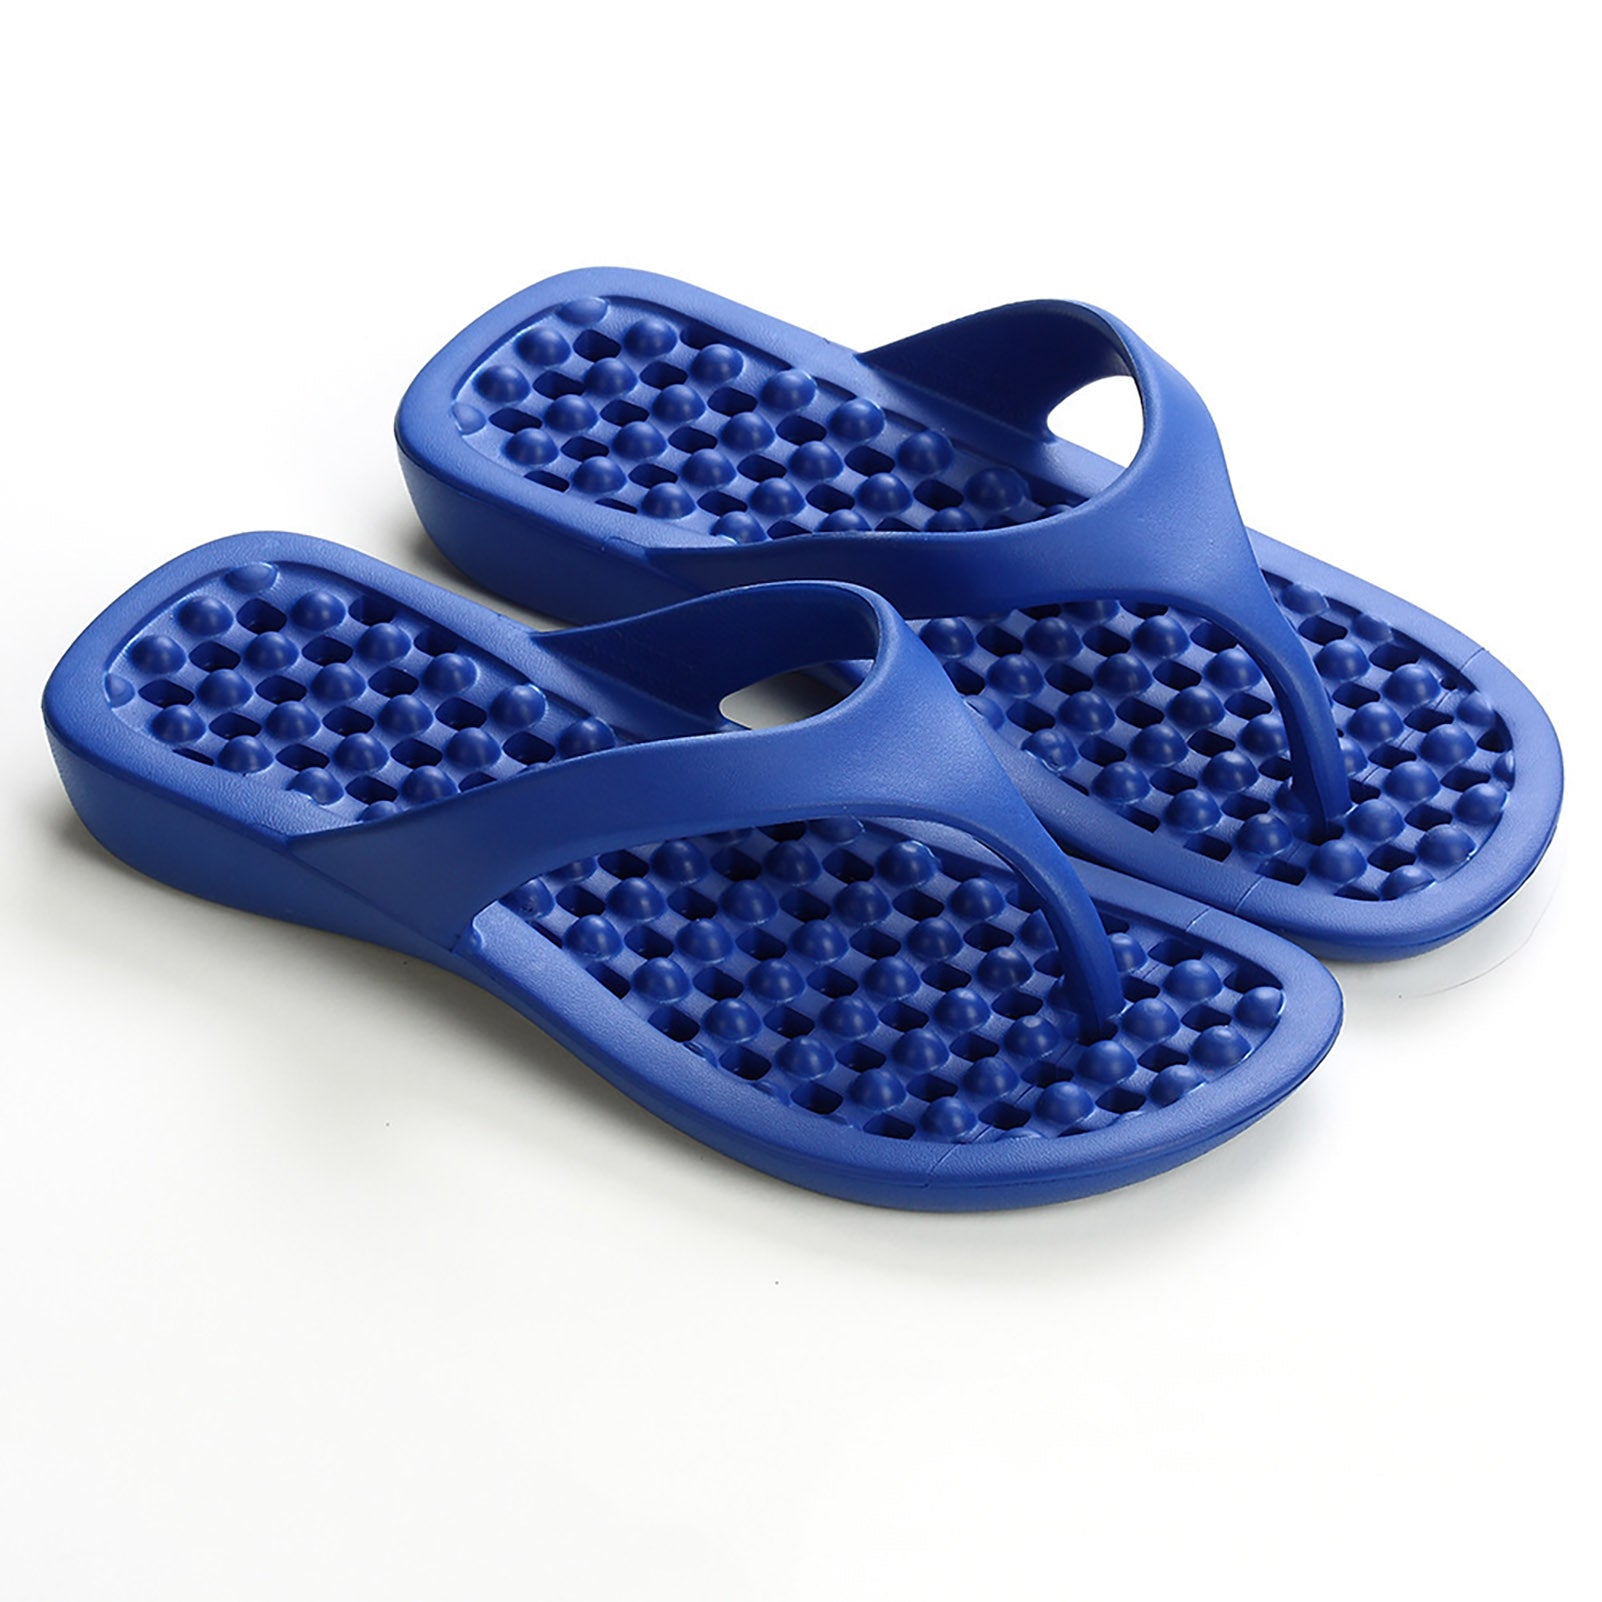 Massage shower quick dry slippers